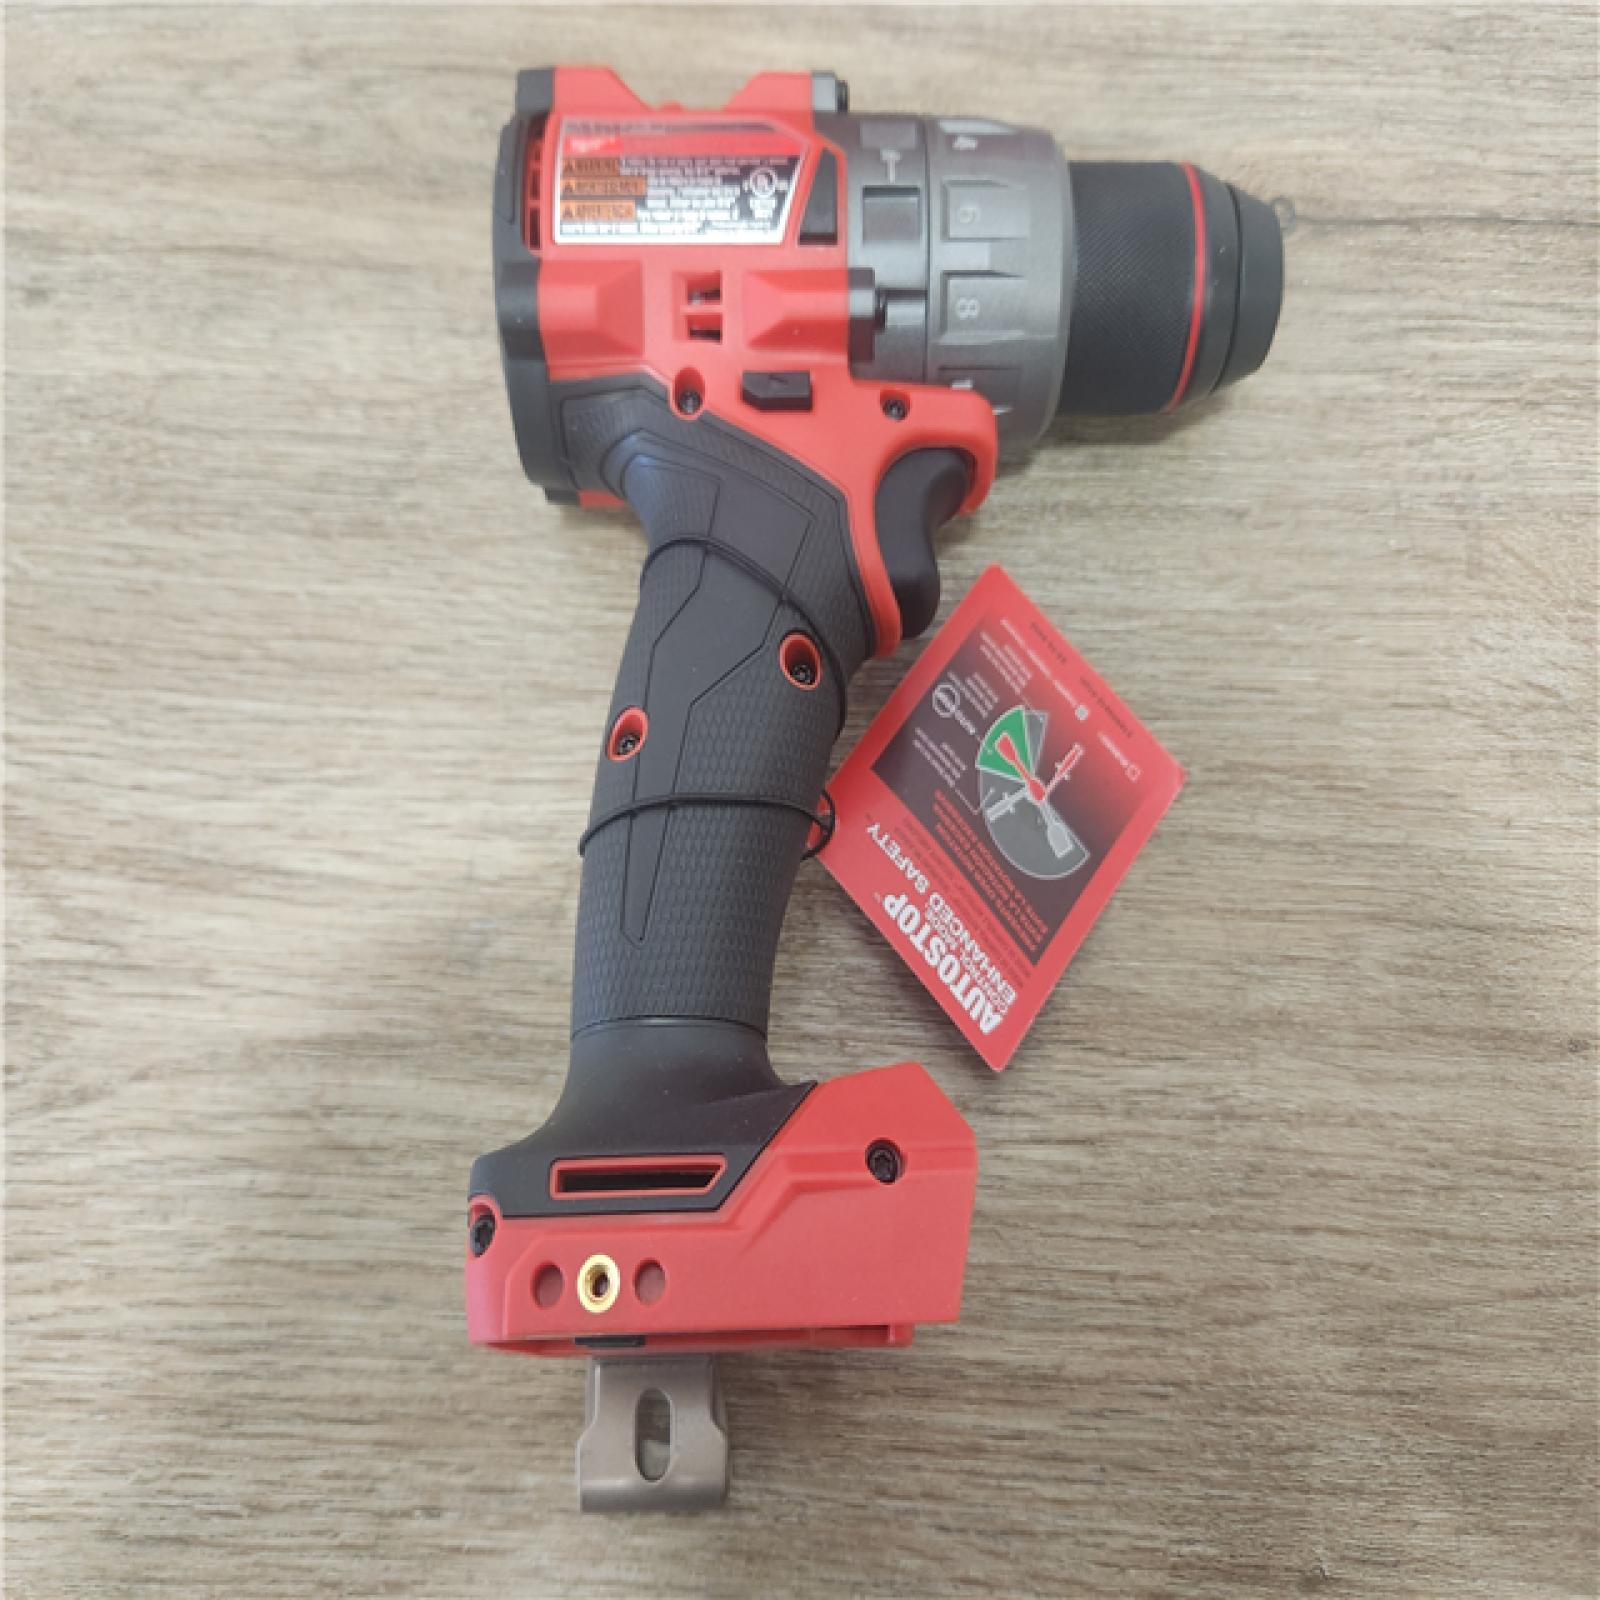 Phoenix Location NEW Milwaukee M18 FUEL 18V Lithium-Ion Brushless Cordless 1/2 in. Hammer Drill/Driver (Tool-Only)